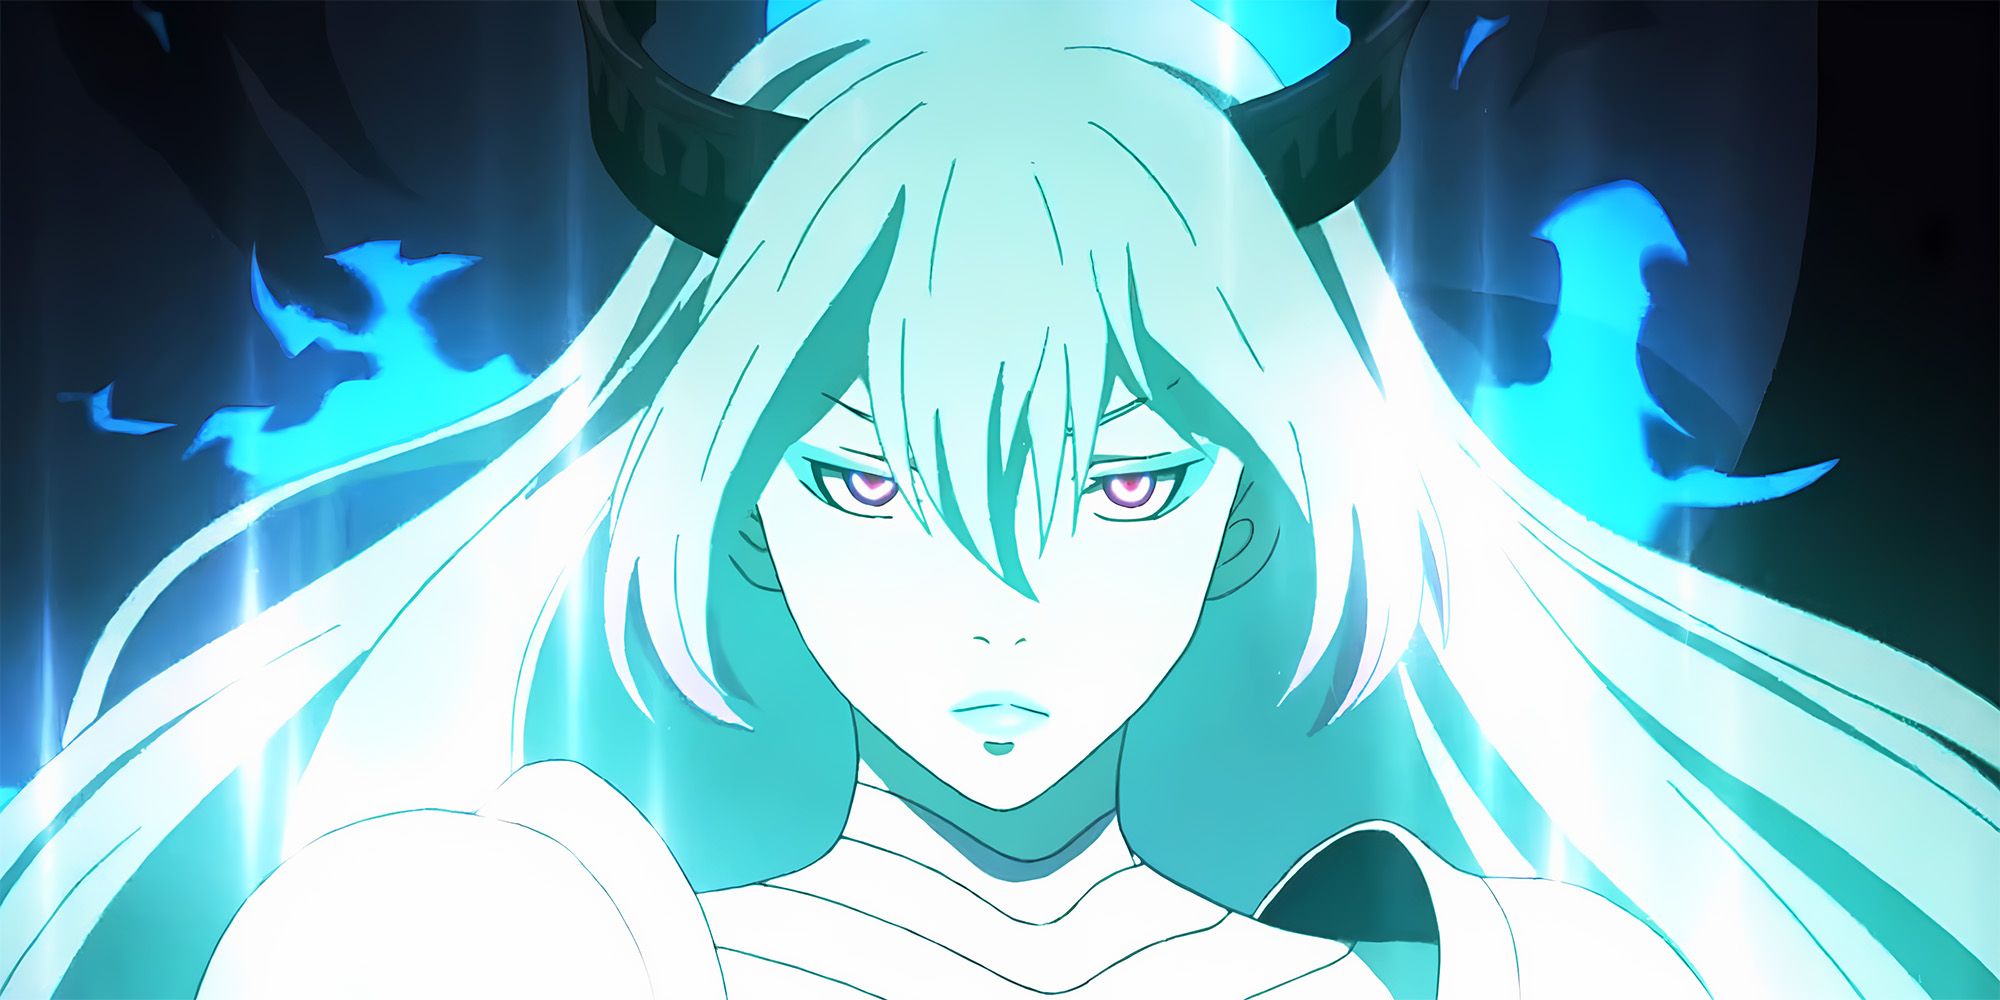 Amira (Demon Form) from Rage of Bahamut